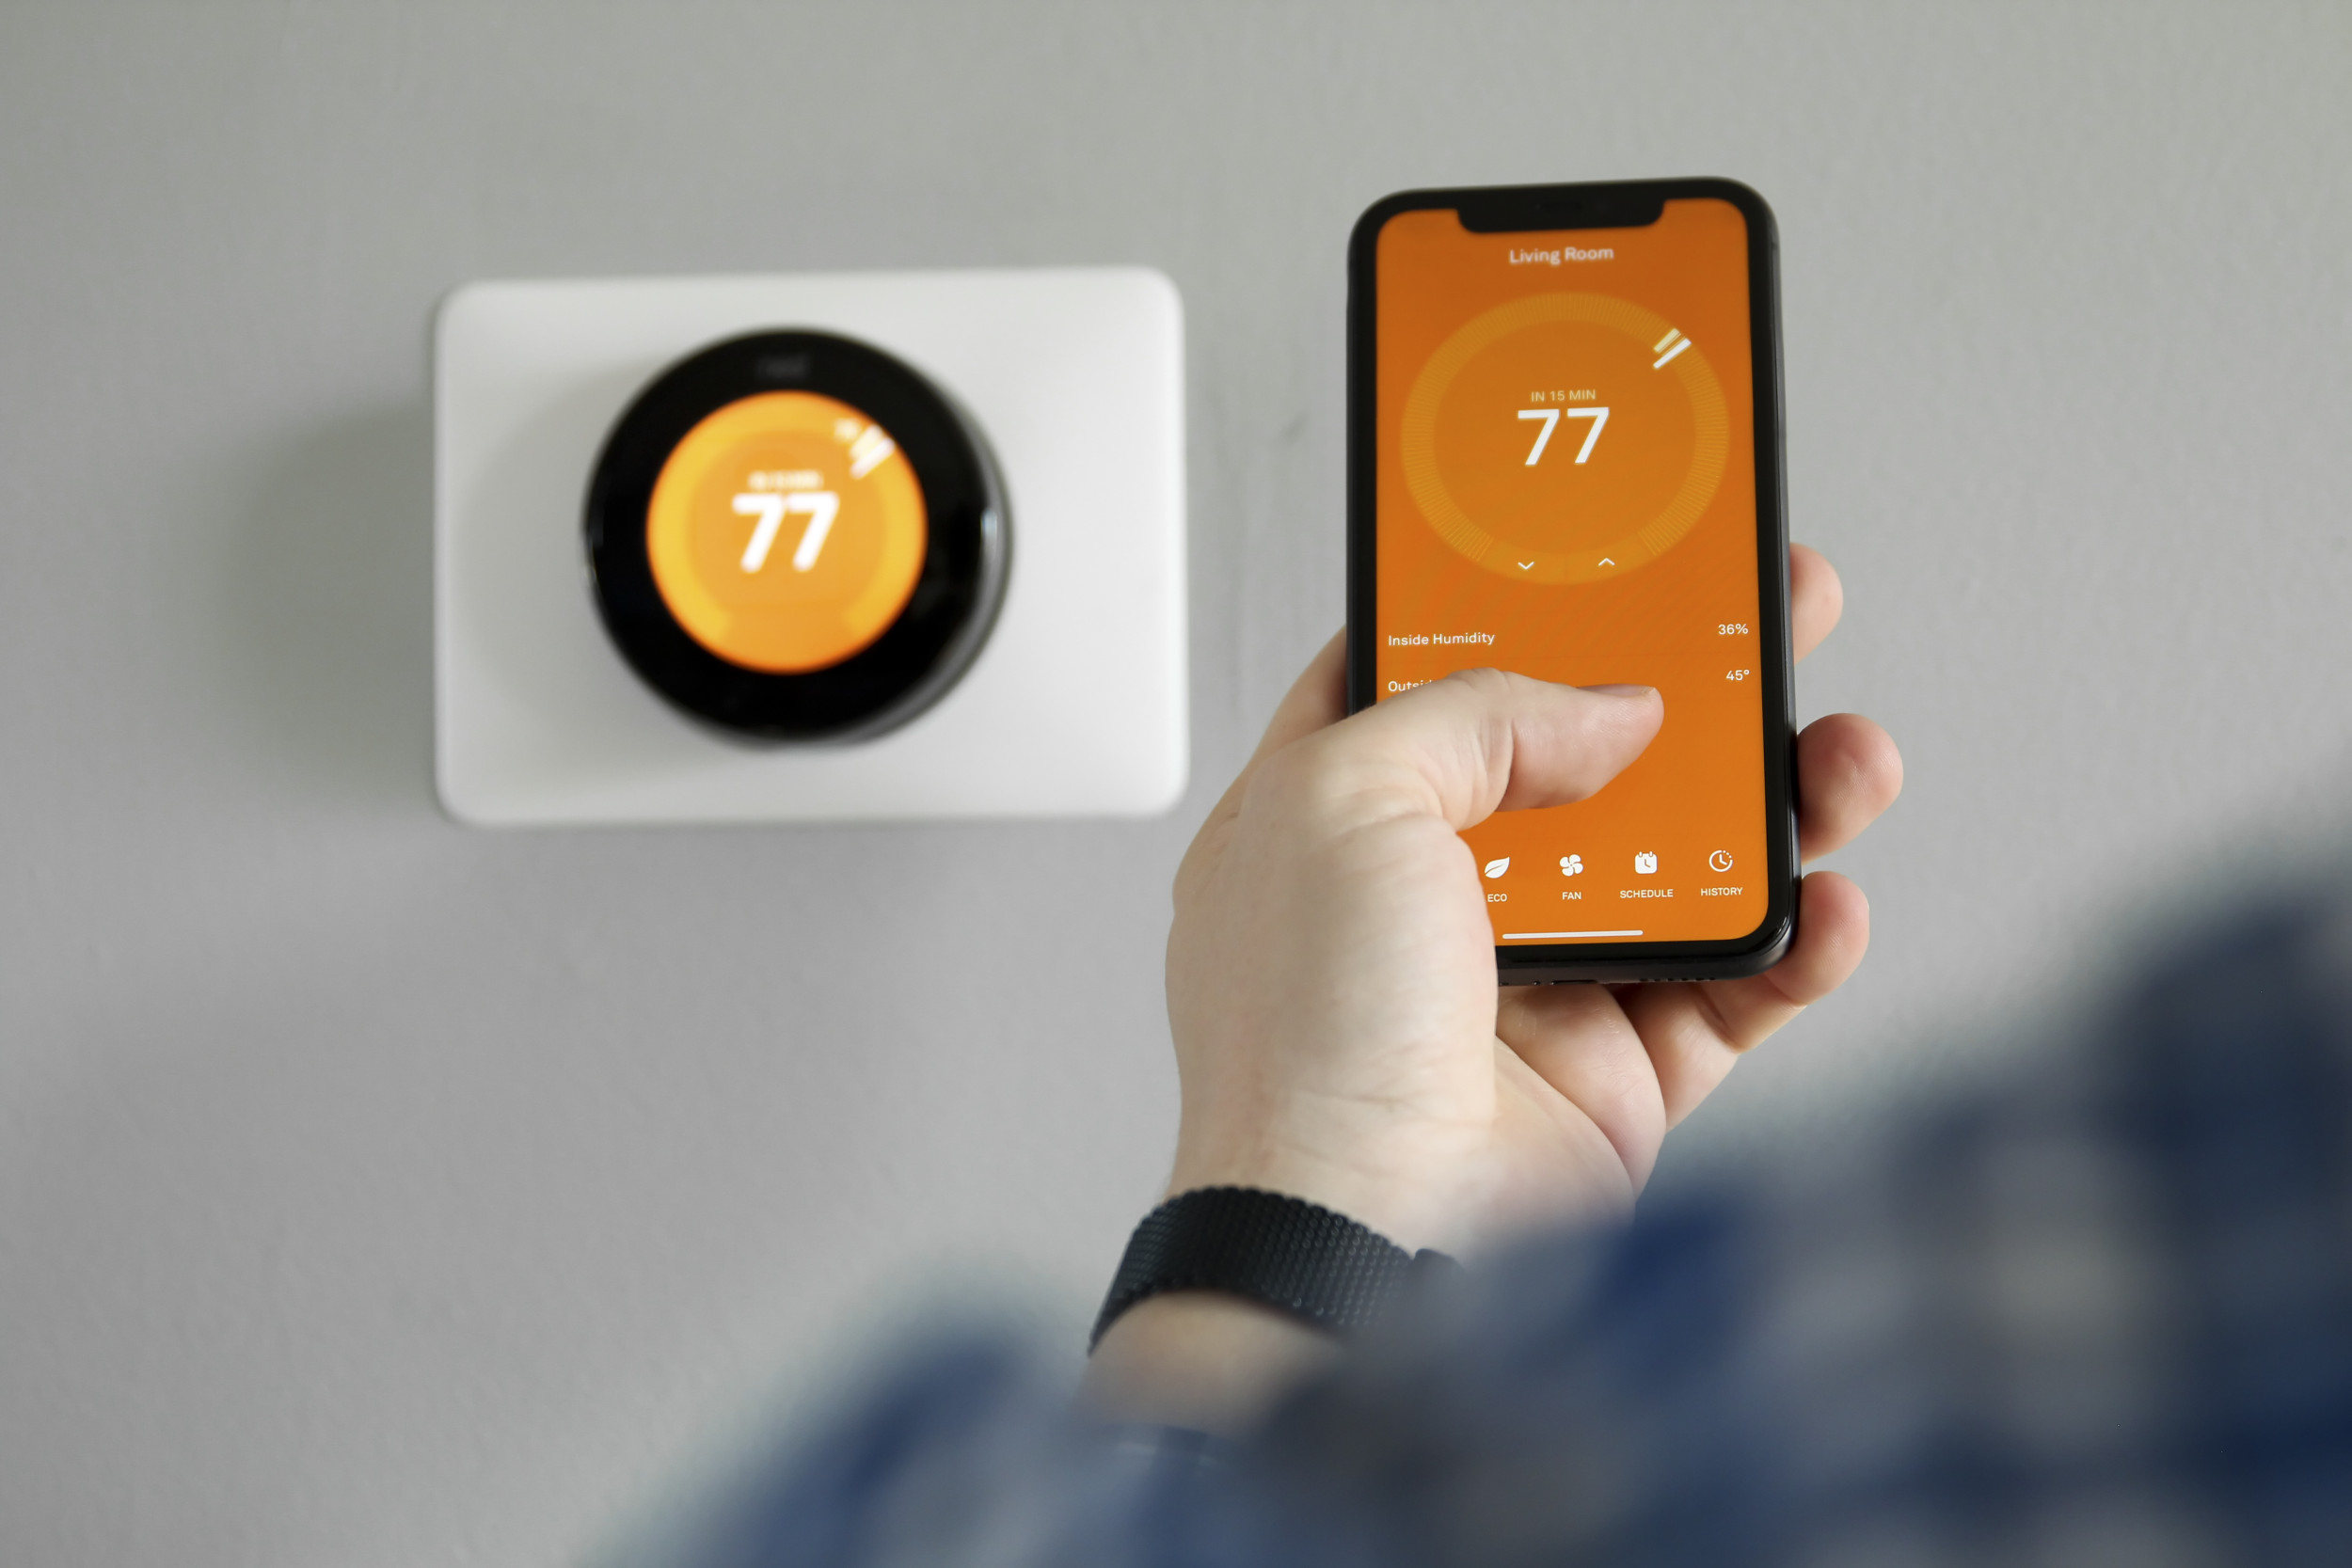 A smart thermostat being used with phone.